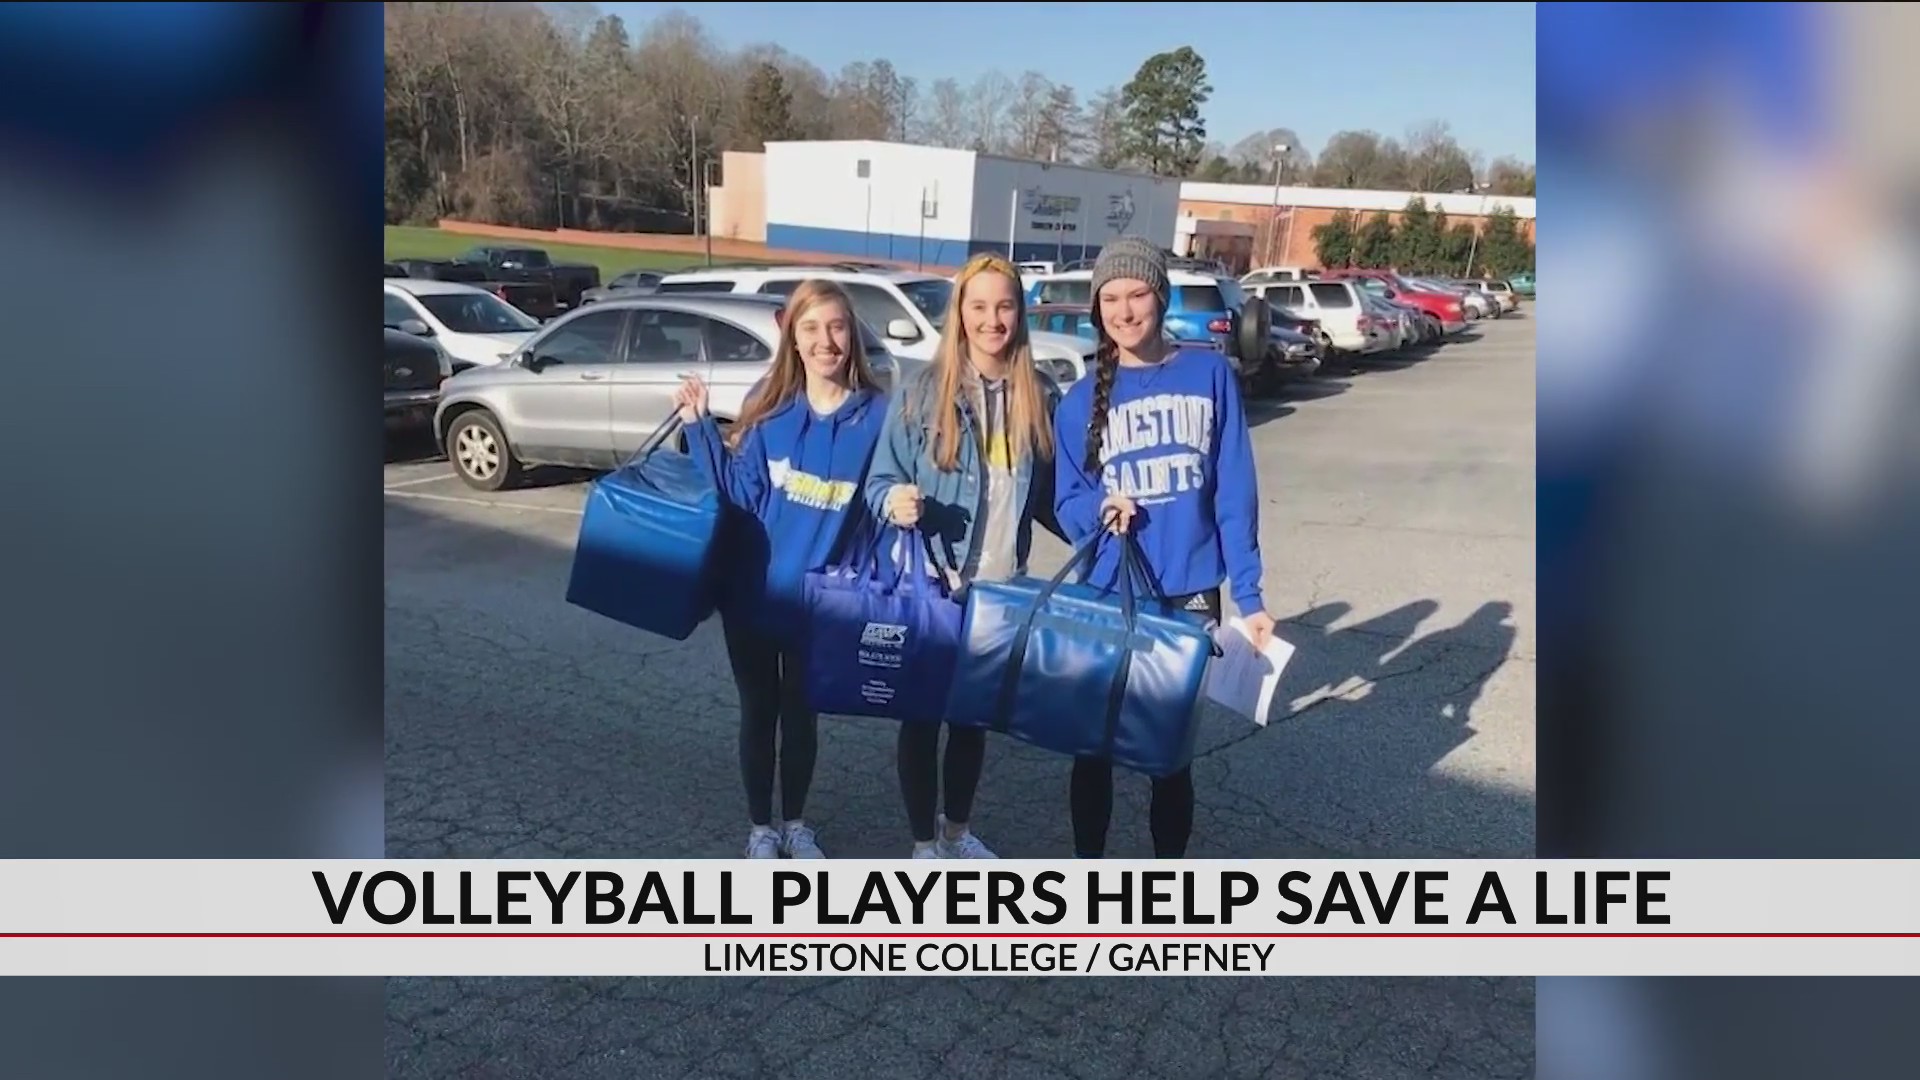 Thumbnail for the video titled "Limestone College volleyball players help save woman's life"